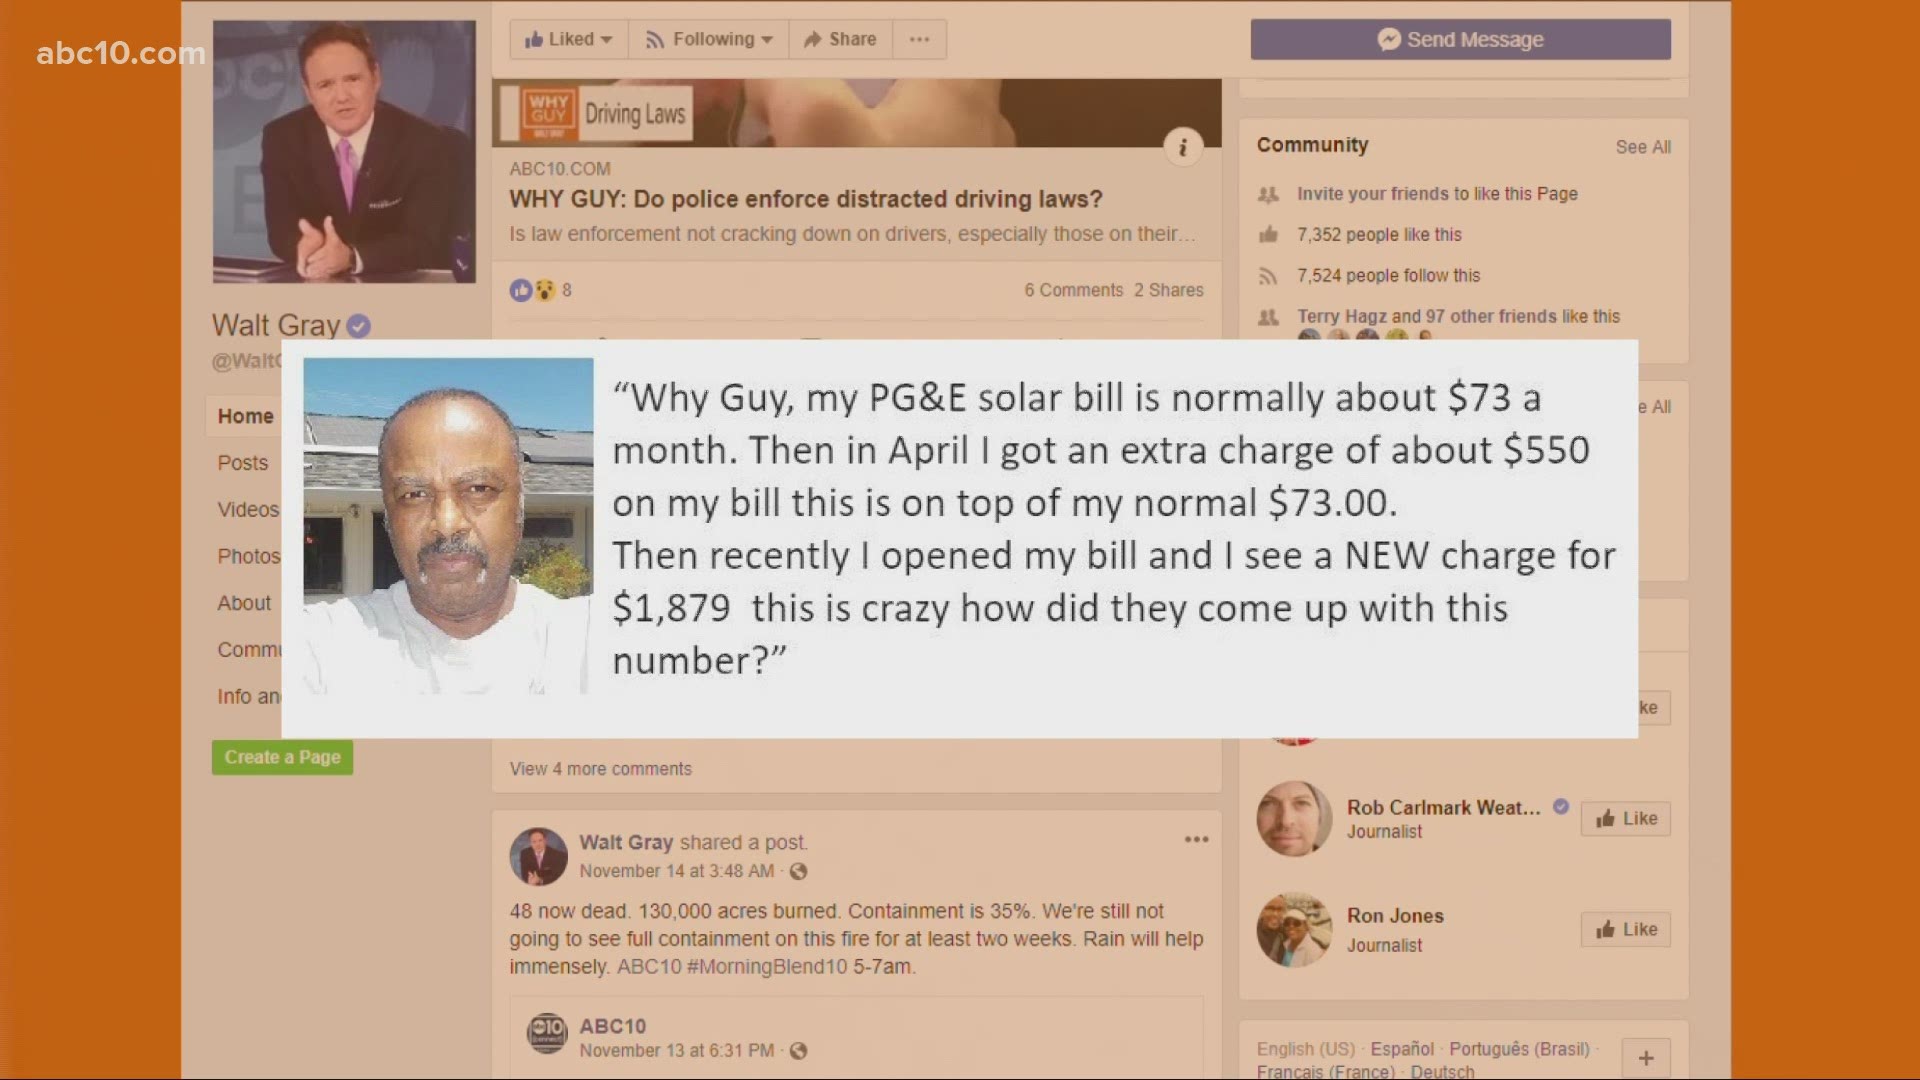 Pete said his recent bill had an added charge of roughly $1,000, though his bill has always been low because of his solar roof.